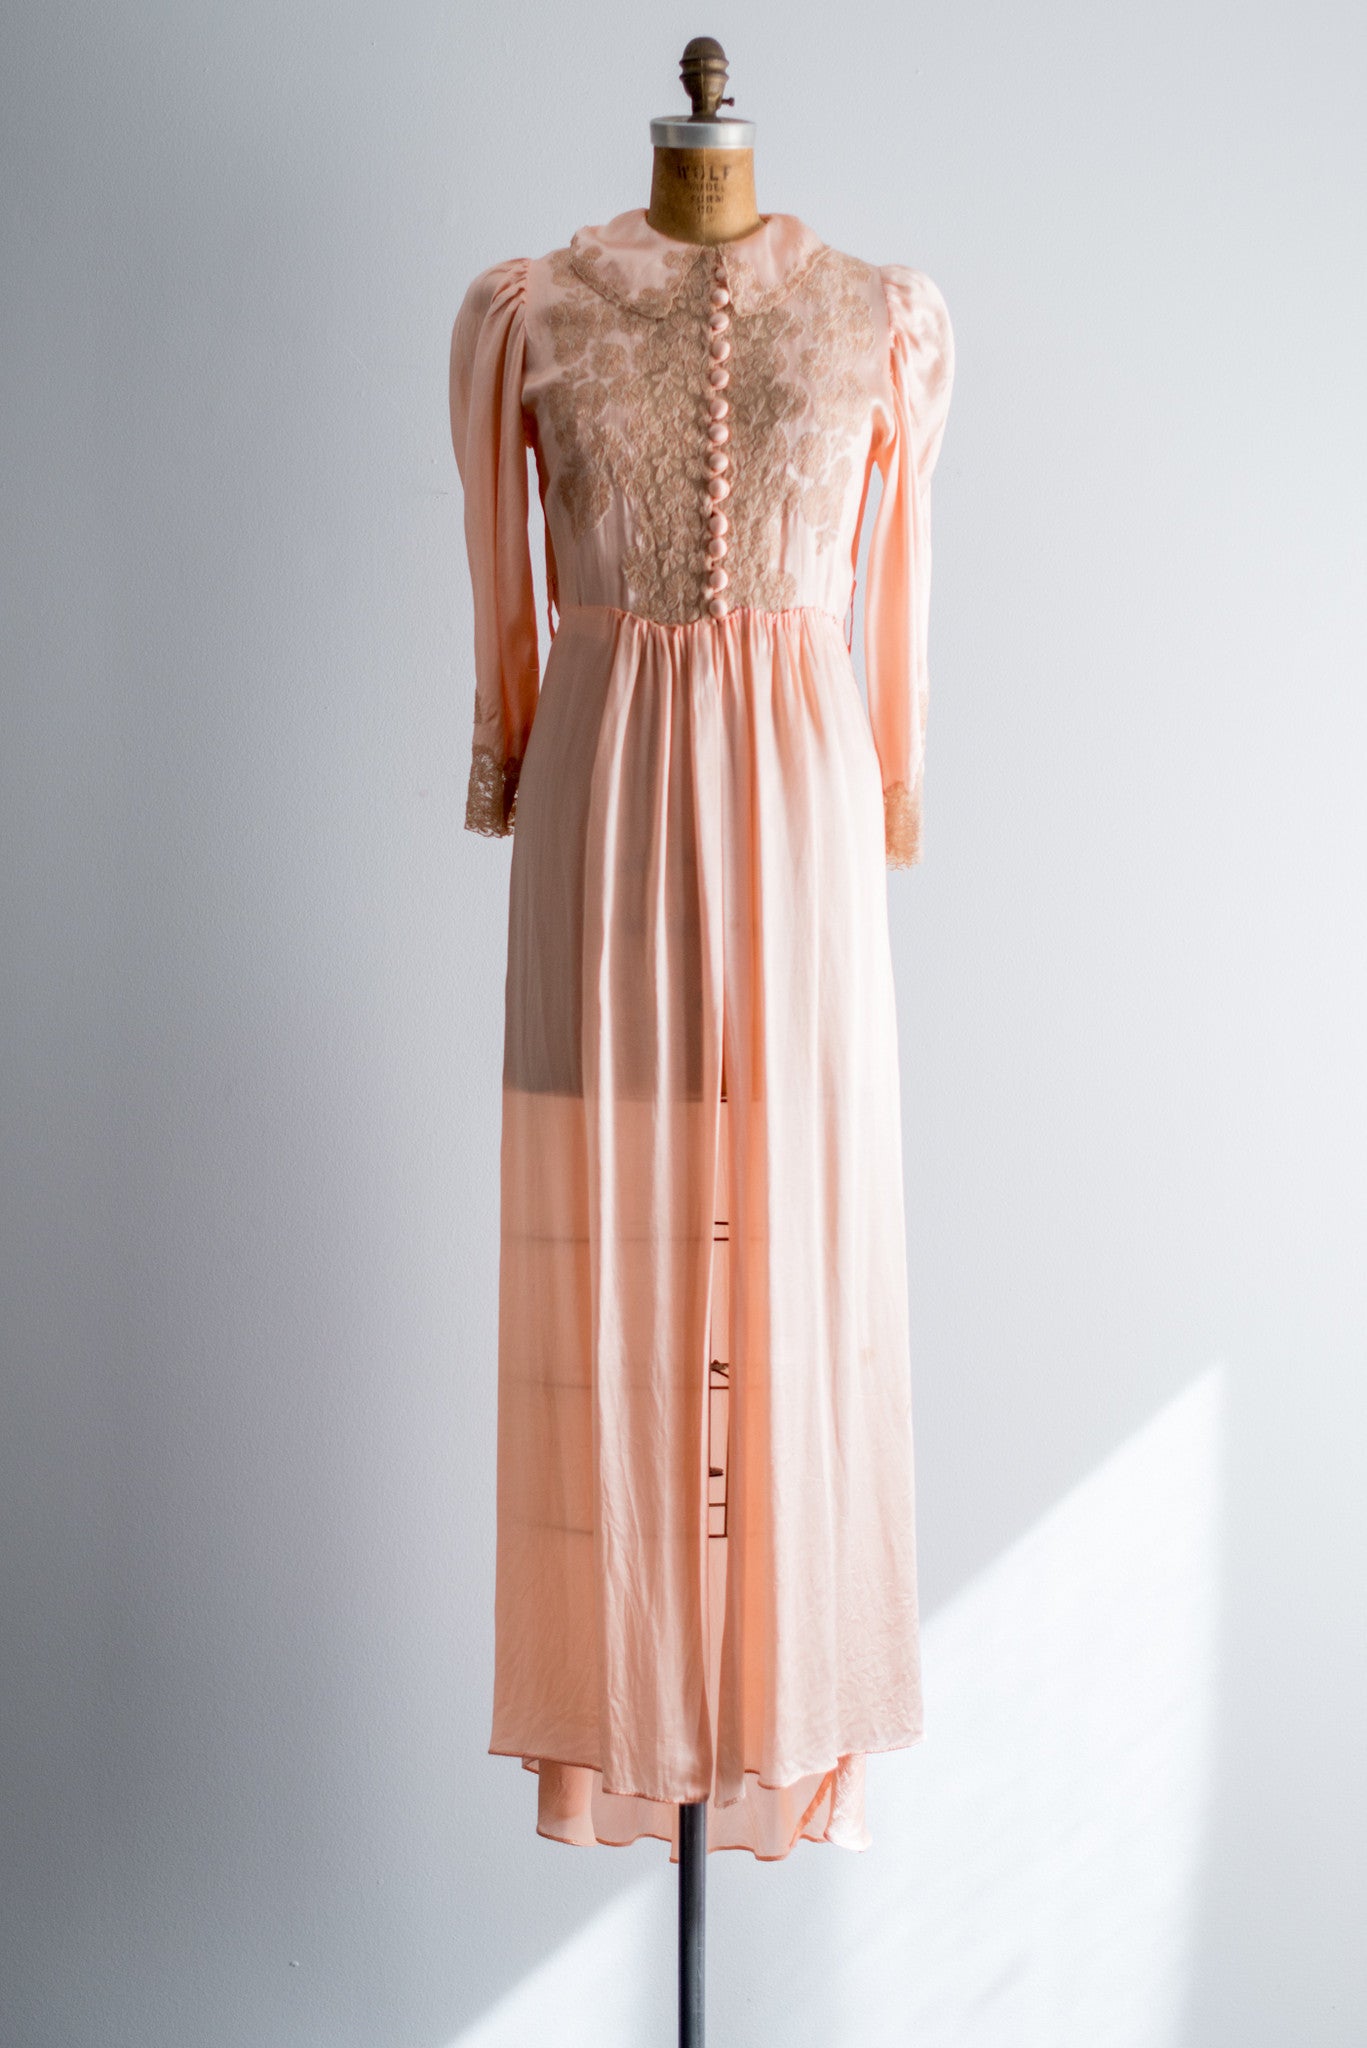 1940s Silk Satin and Lace Dressing Gown - S/M | G O S S A M E R